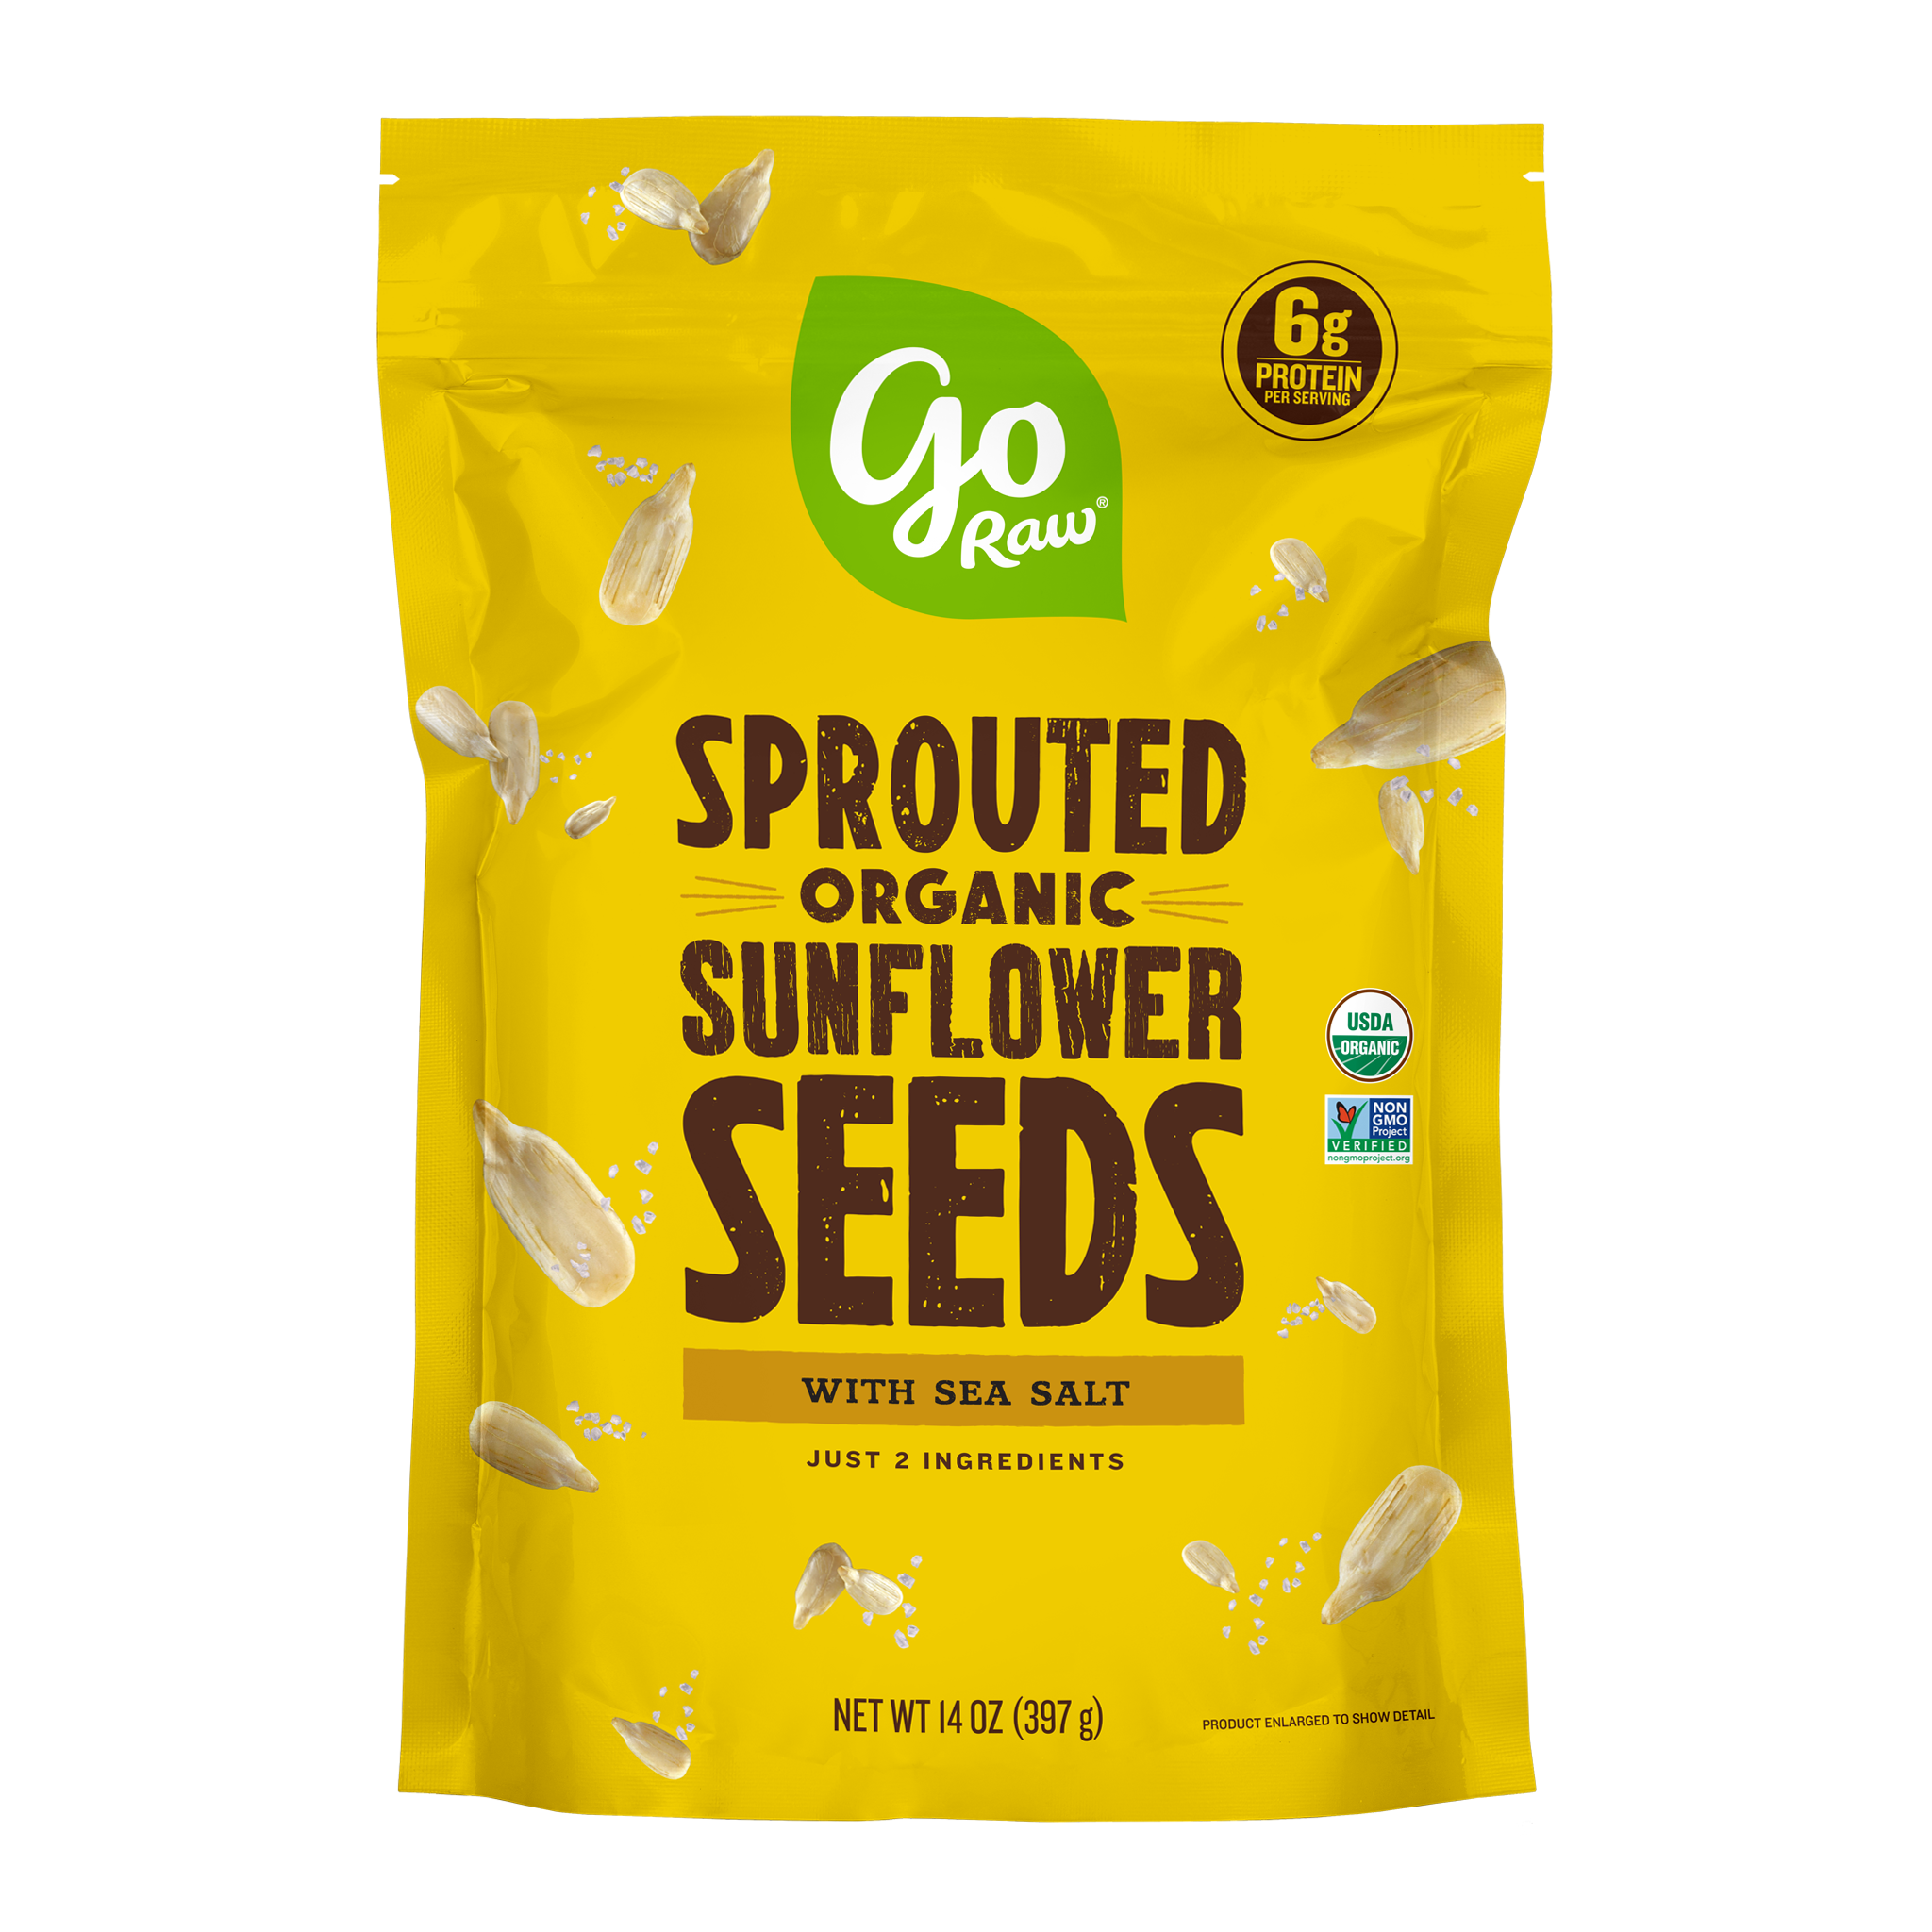 Sprouted Sunflower Seeds - 6 Bags, 14oz Each